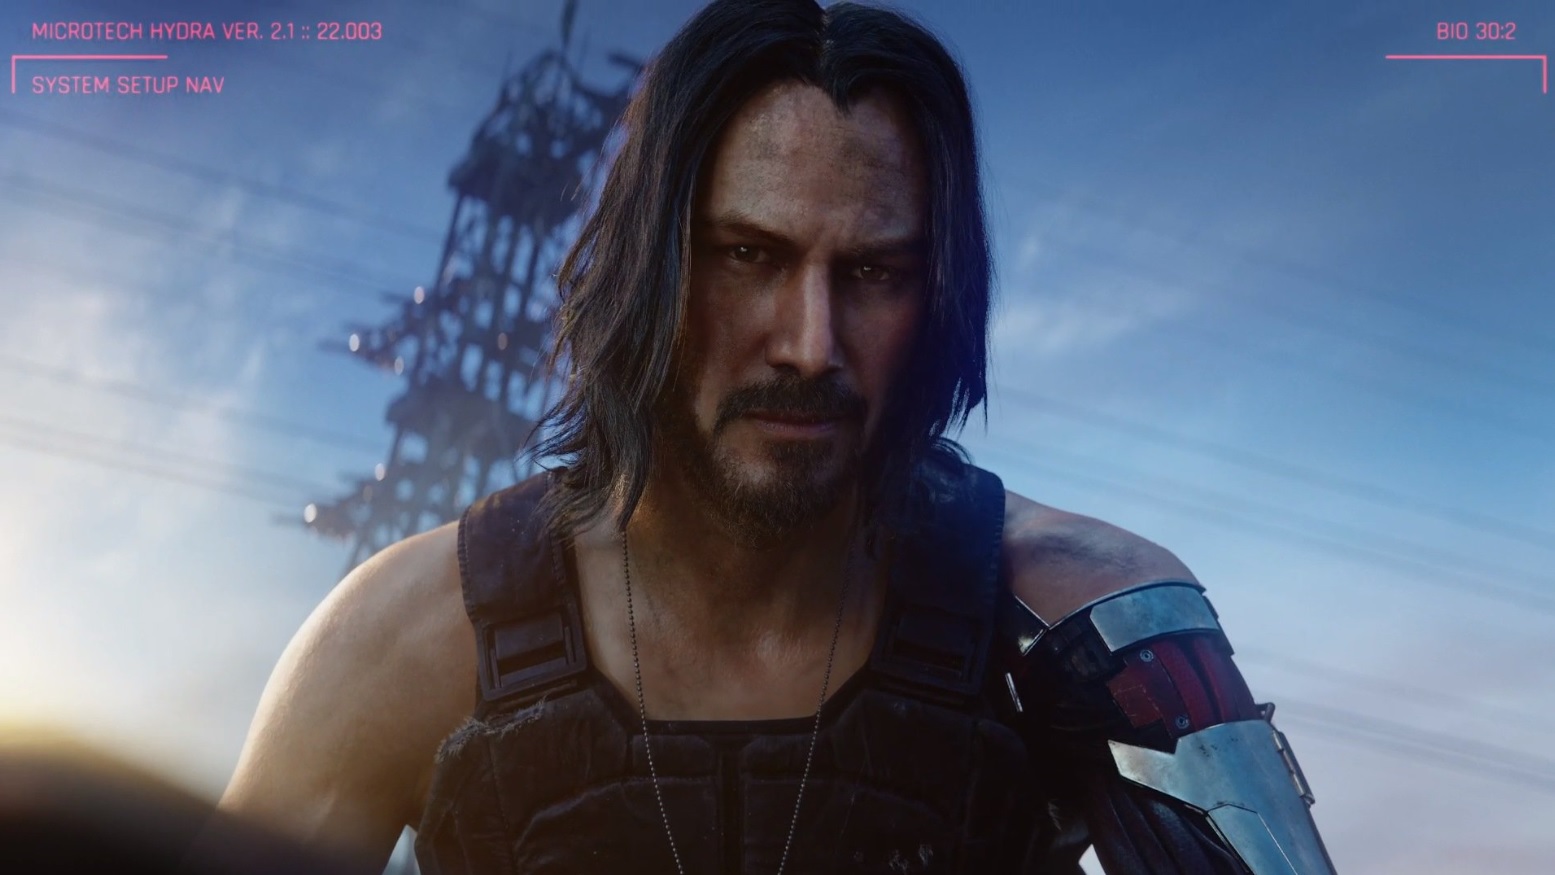 Hoping To Play Cyberpunk 2077 On A Next-Gen Console? You May Have To Wait